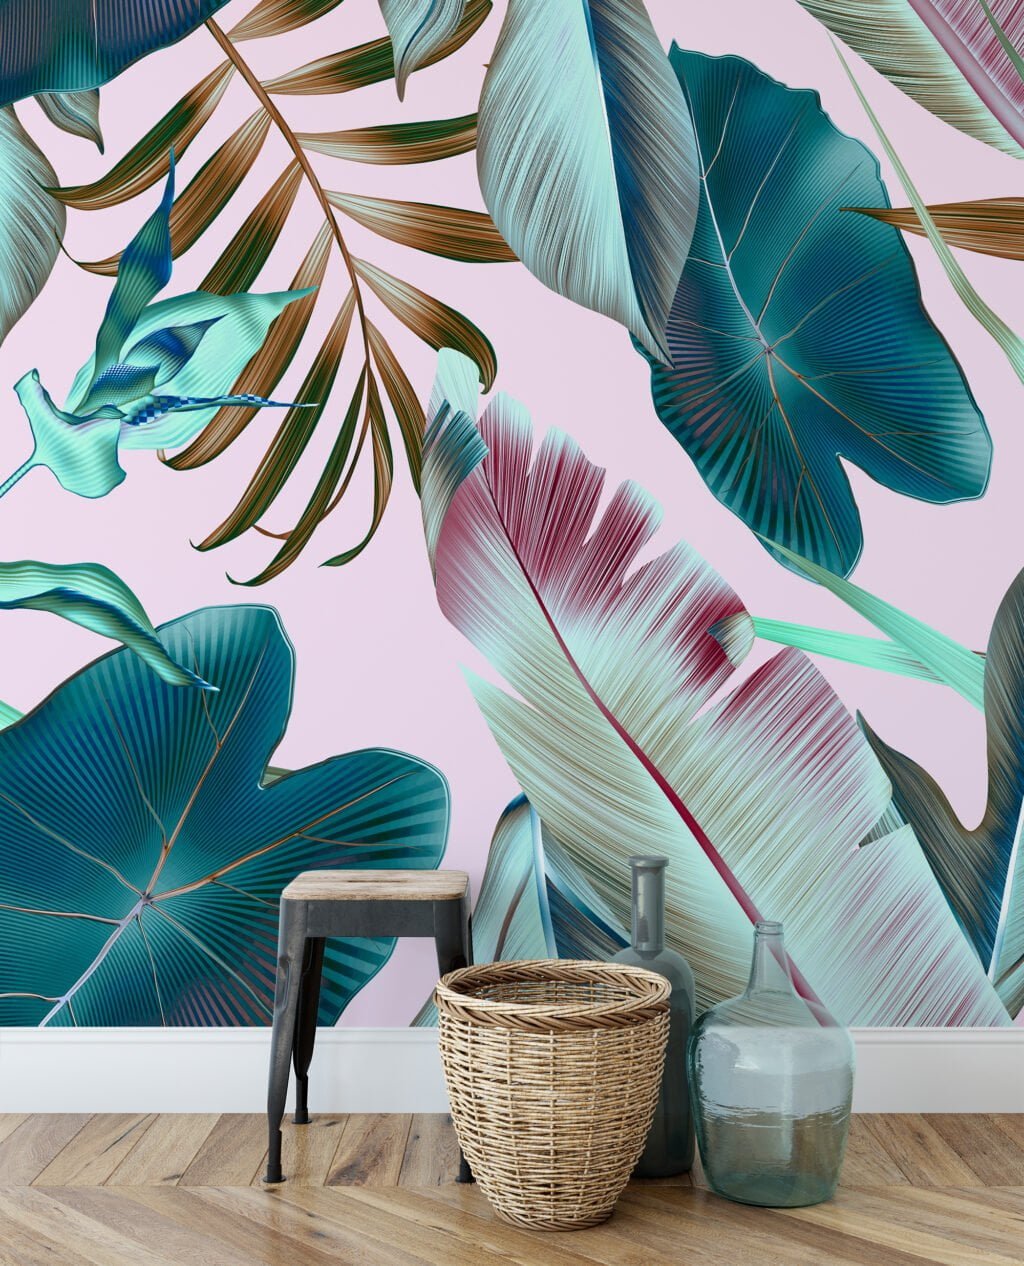 Large Tropical Leaves With A Pastel Pink Background Wallpaper, Tropical Escape Leaves Peel & Stick Wall Mural